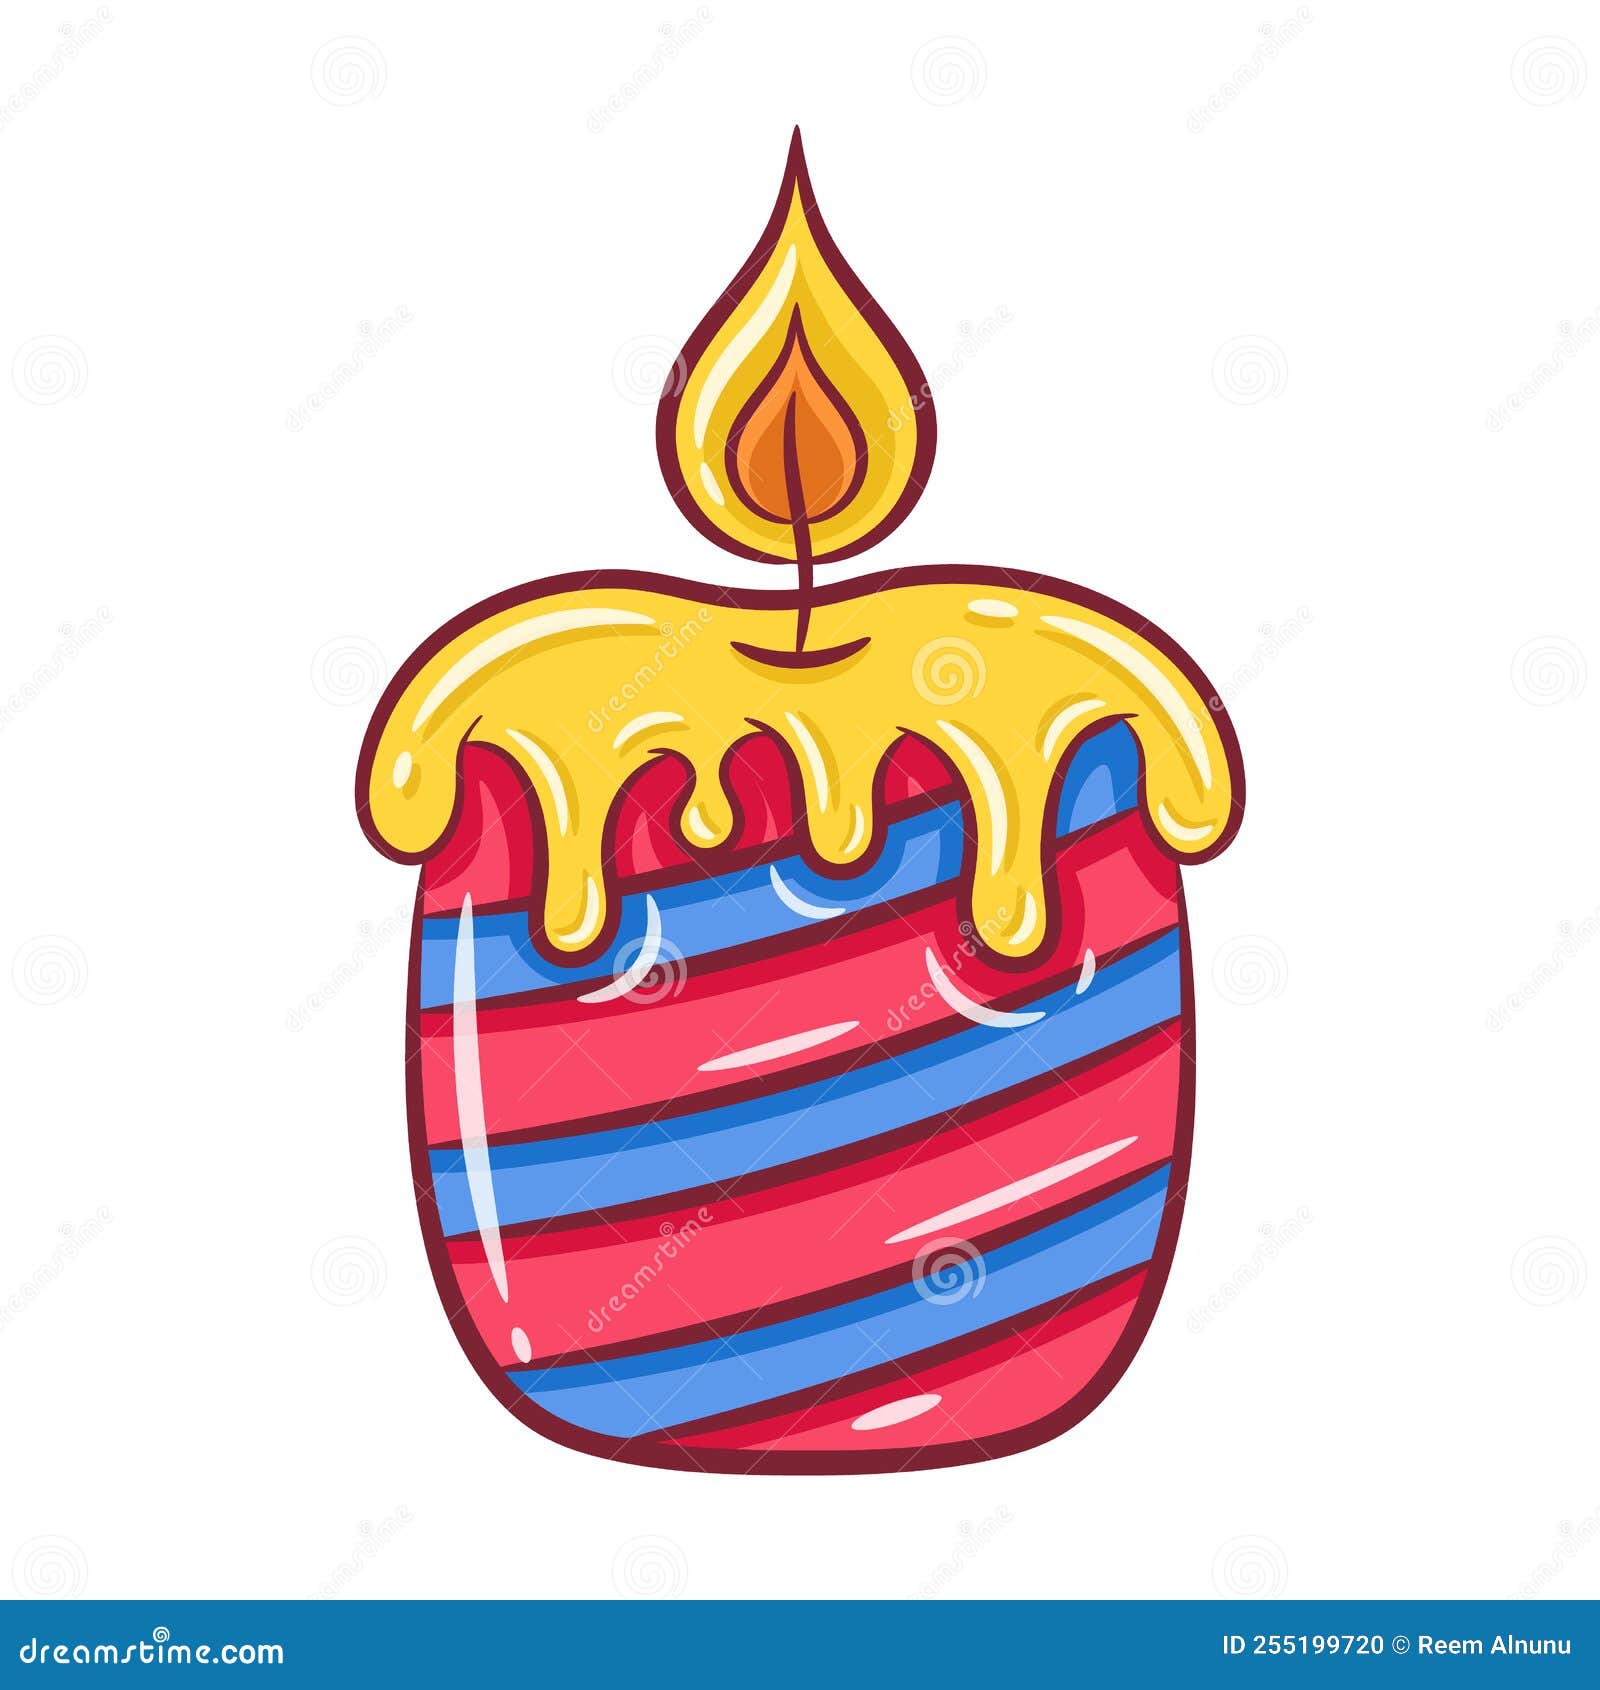 Cute Simple Candle Art Lines Merry Christmas, Cute PNG Image, Simple PNG,  Candle Free PNG Image PNG Free Download And Clipart Image For Free Download  - Lovepik | 375688193